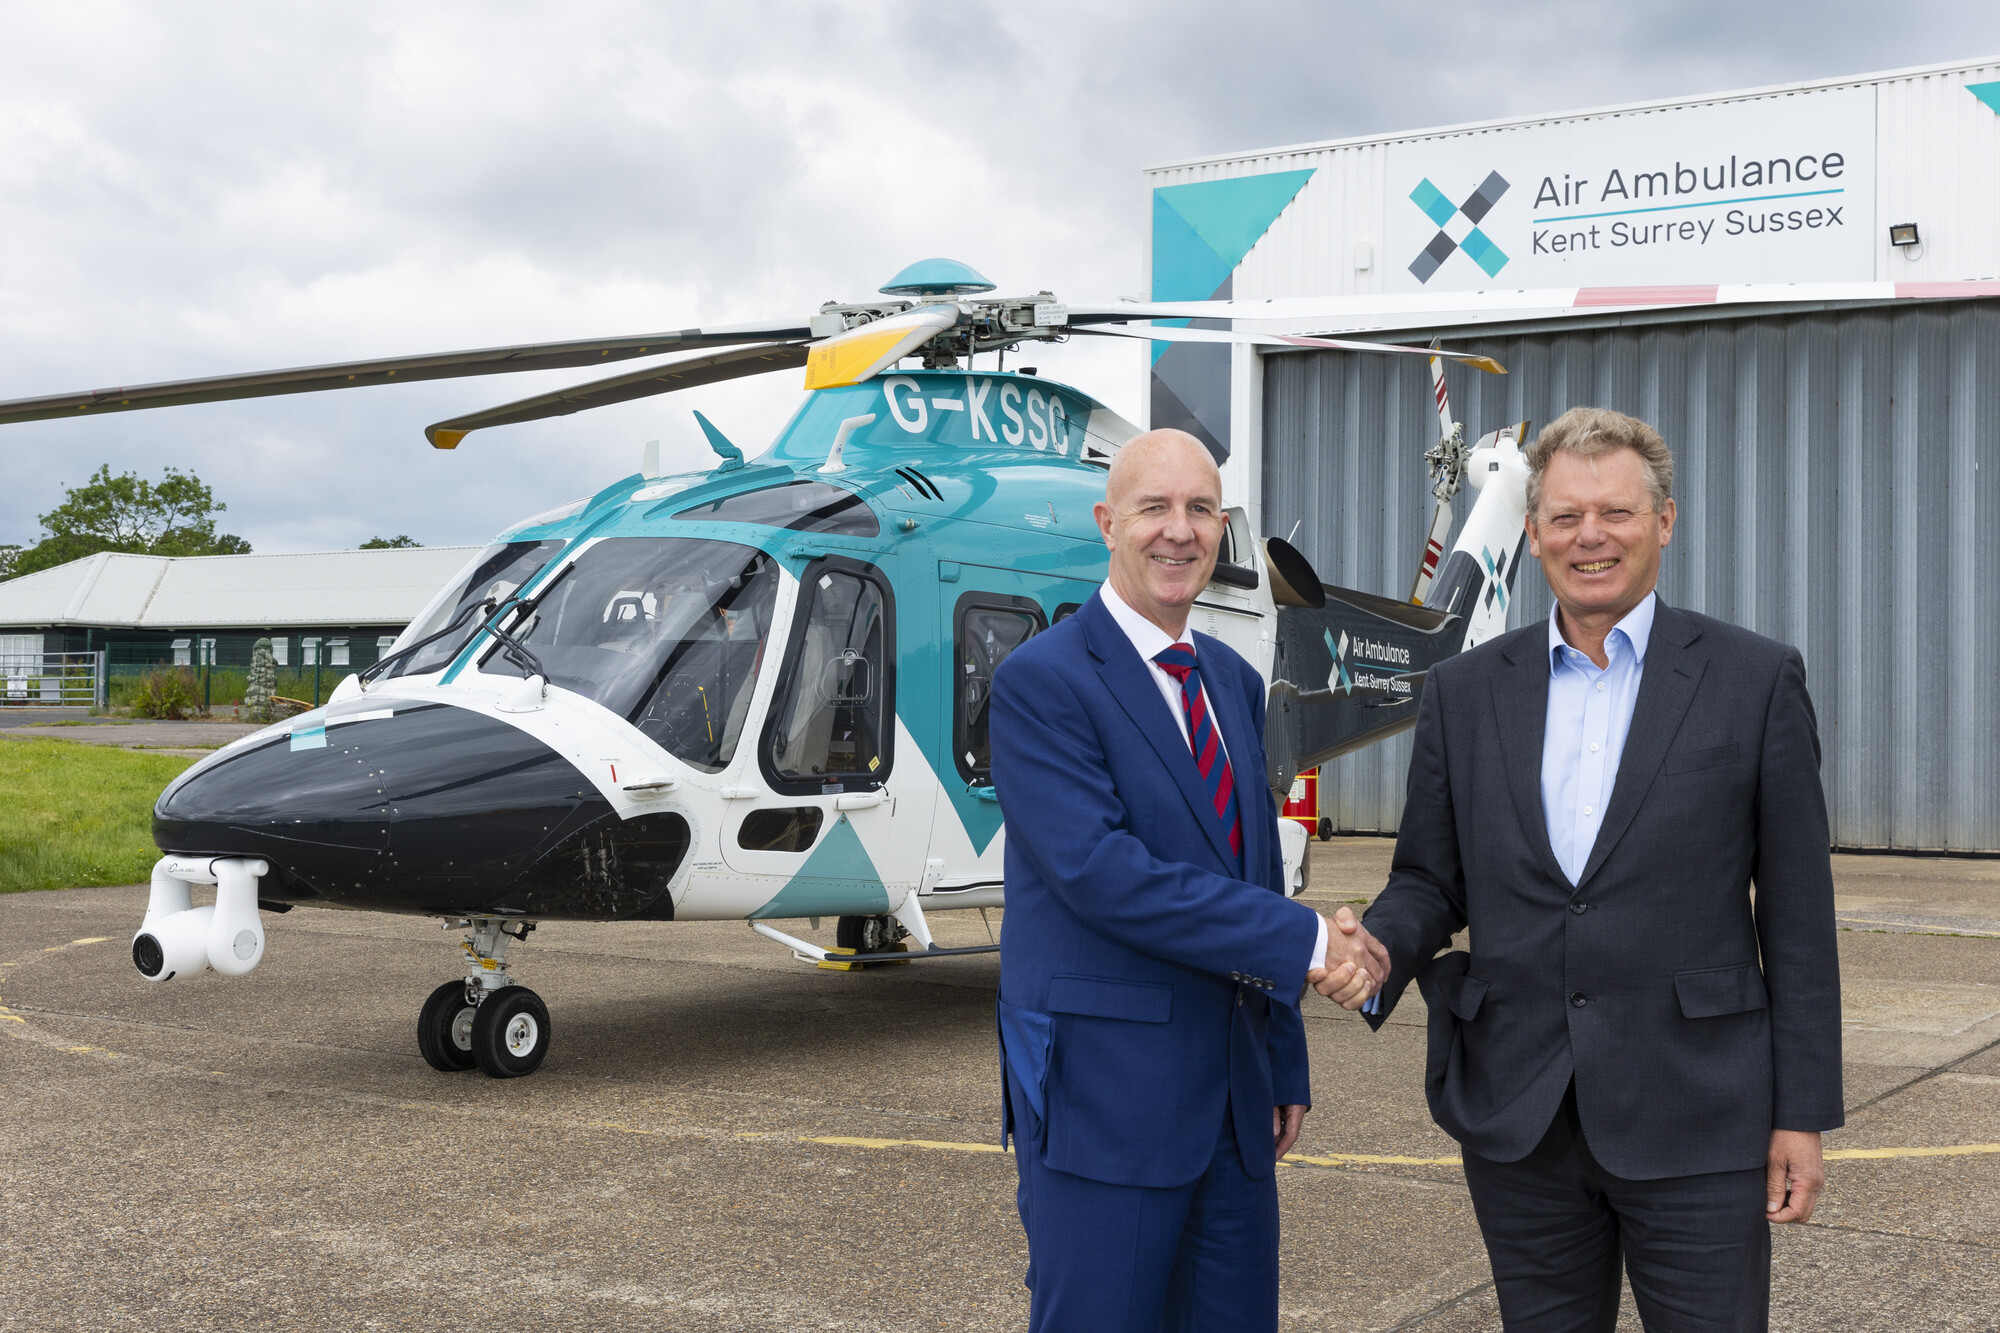 David Welch, Chief Executive of KSS and Jonathan Neame, Chief Executive of Shepherd Neame at the charity’s operational base at Redhill Aerodrome